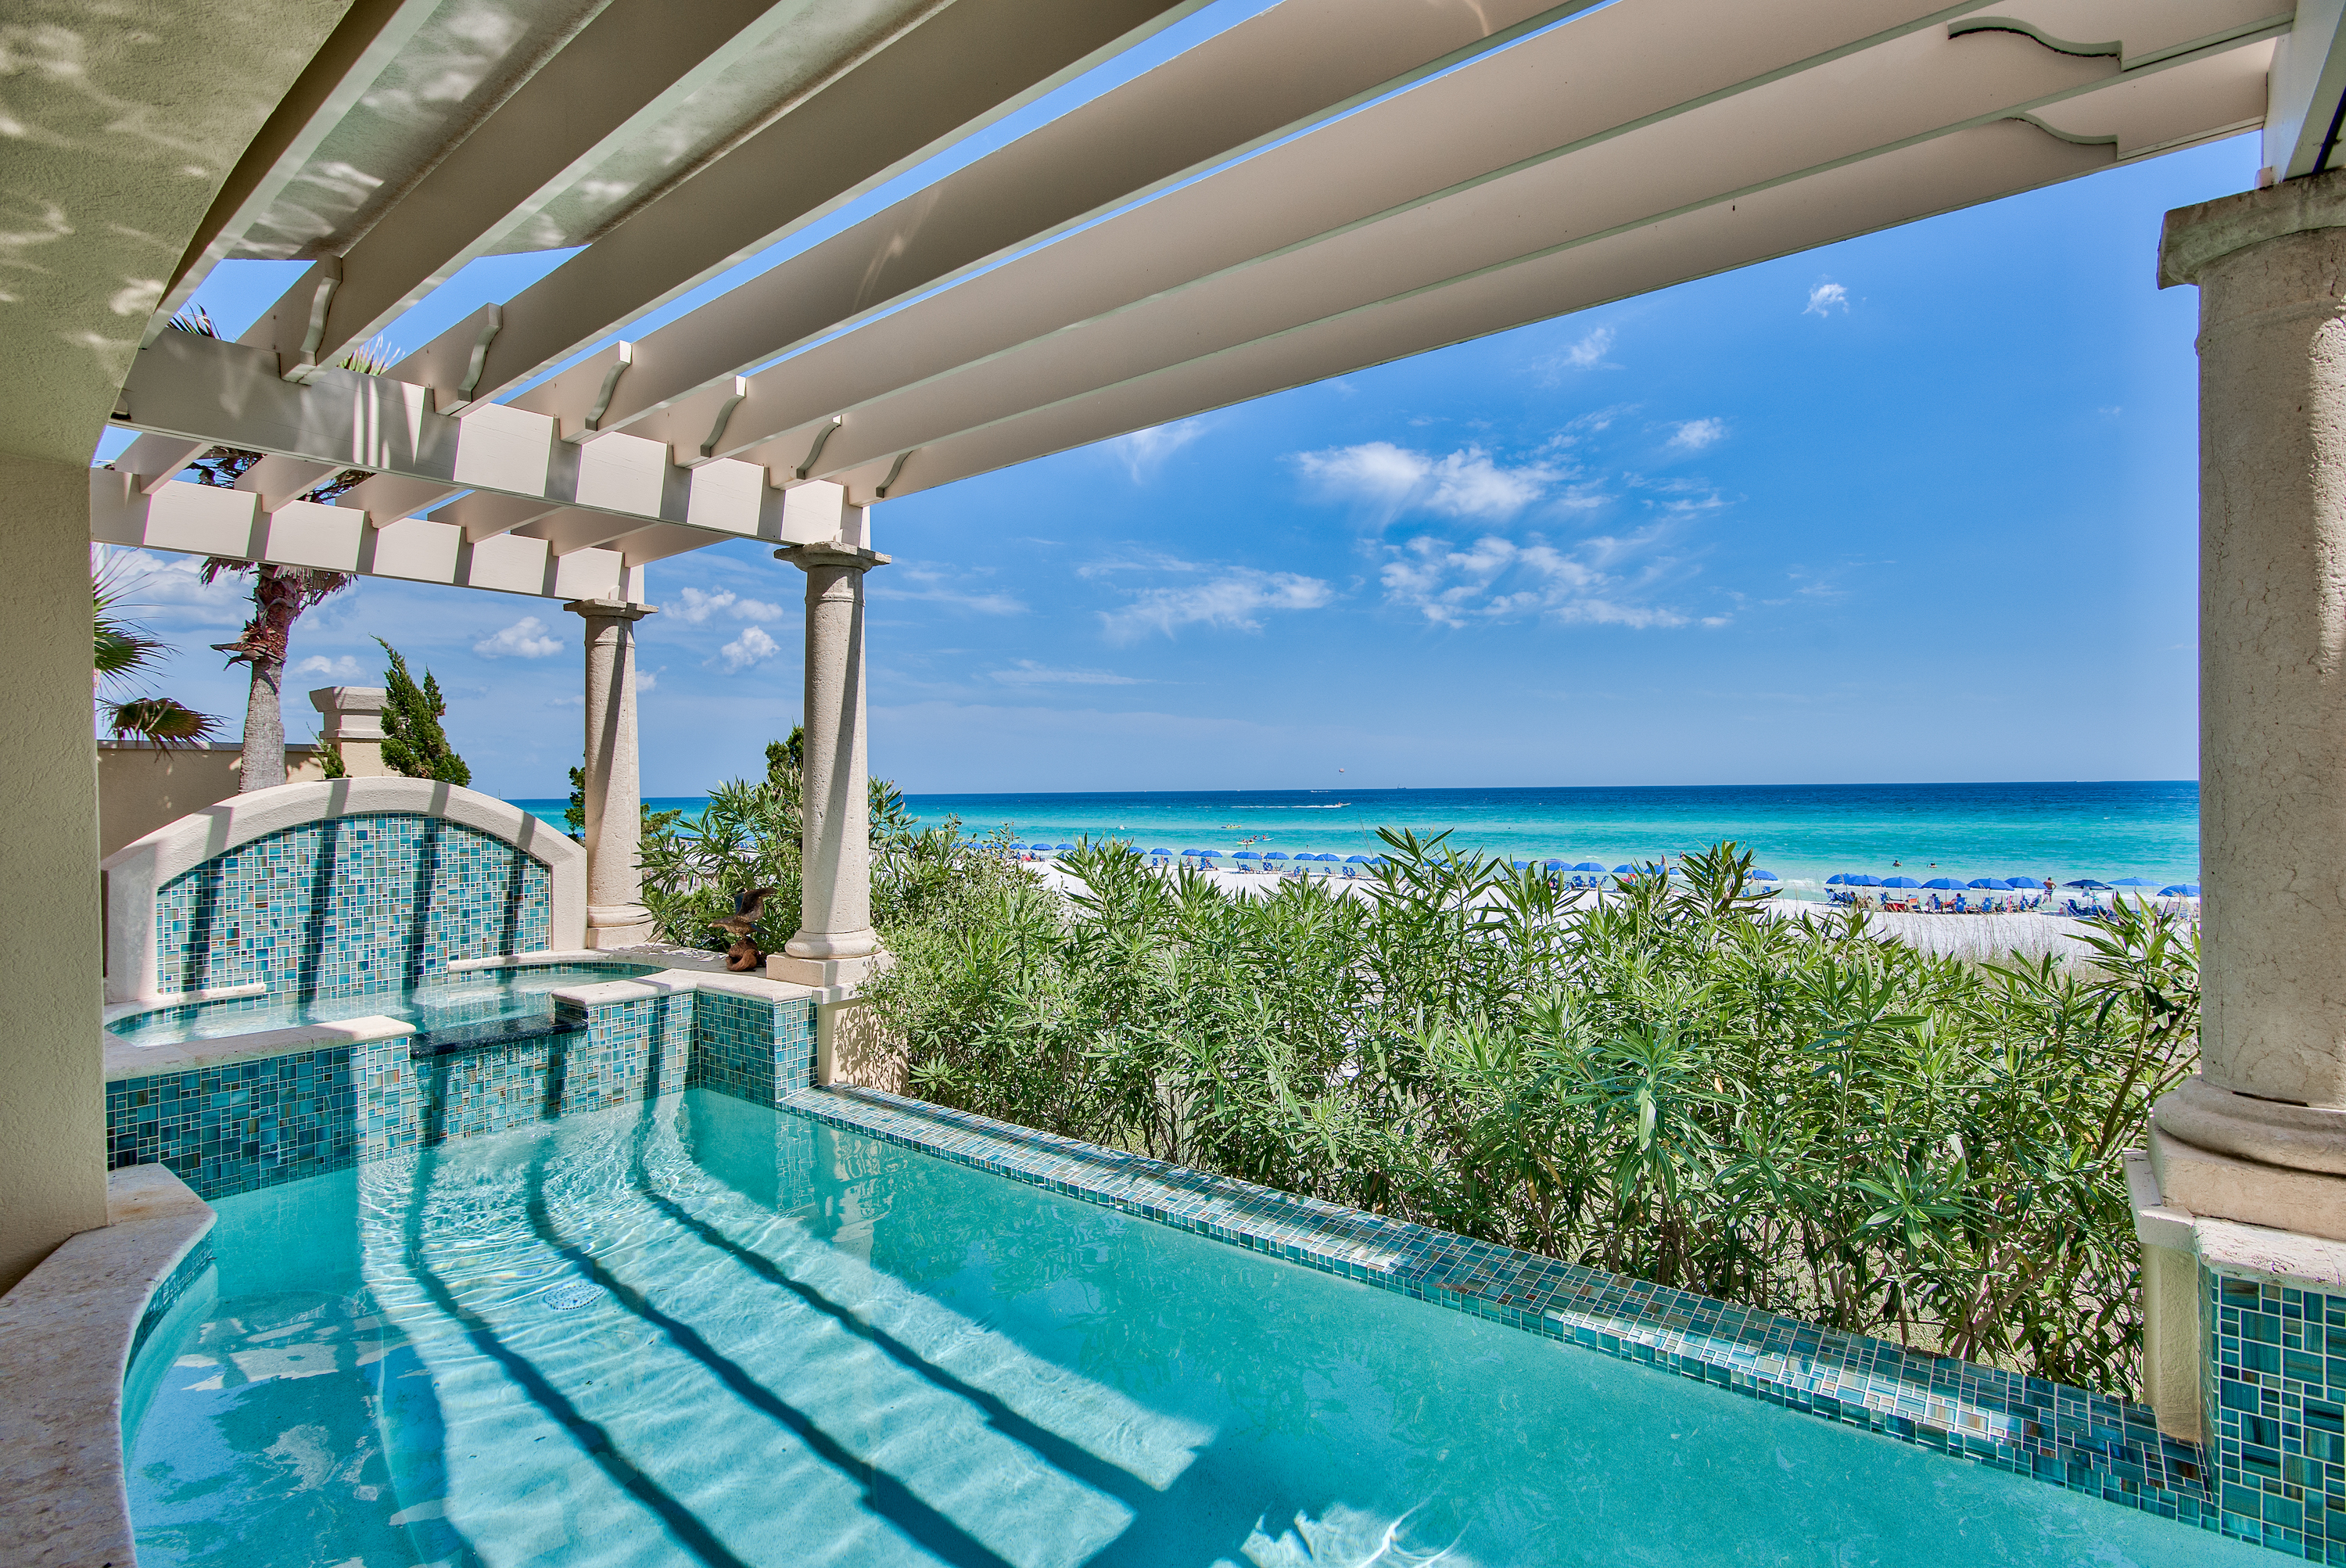 A view of turquoise Gulf waters from the private covered outdoor door of a Gulf front home in Destin